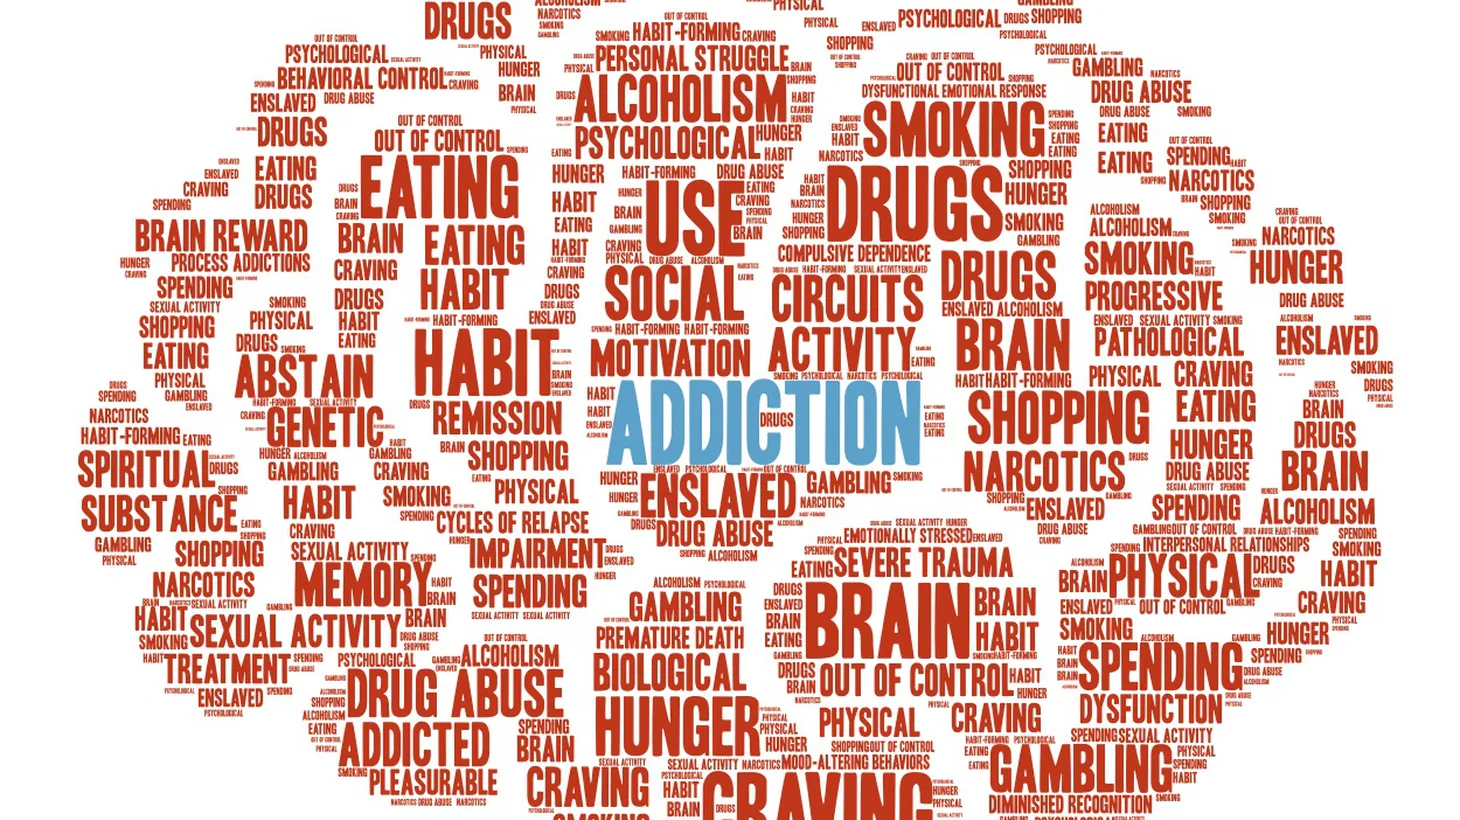 To better understand the history of and reasons for addiction, Jonathan Bastian talks with doctors and journalists about the complexities of addiction and treatment.